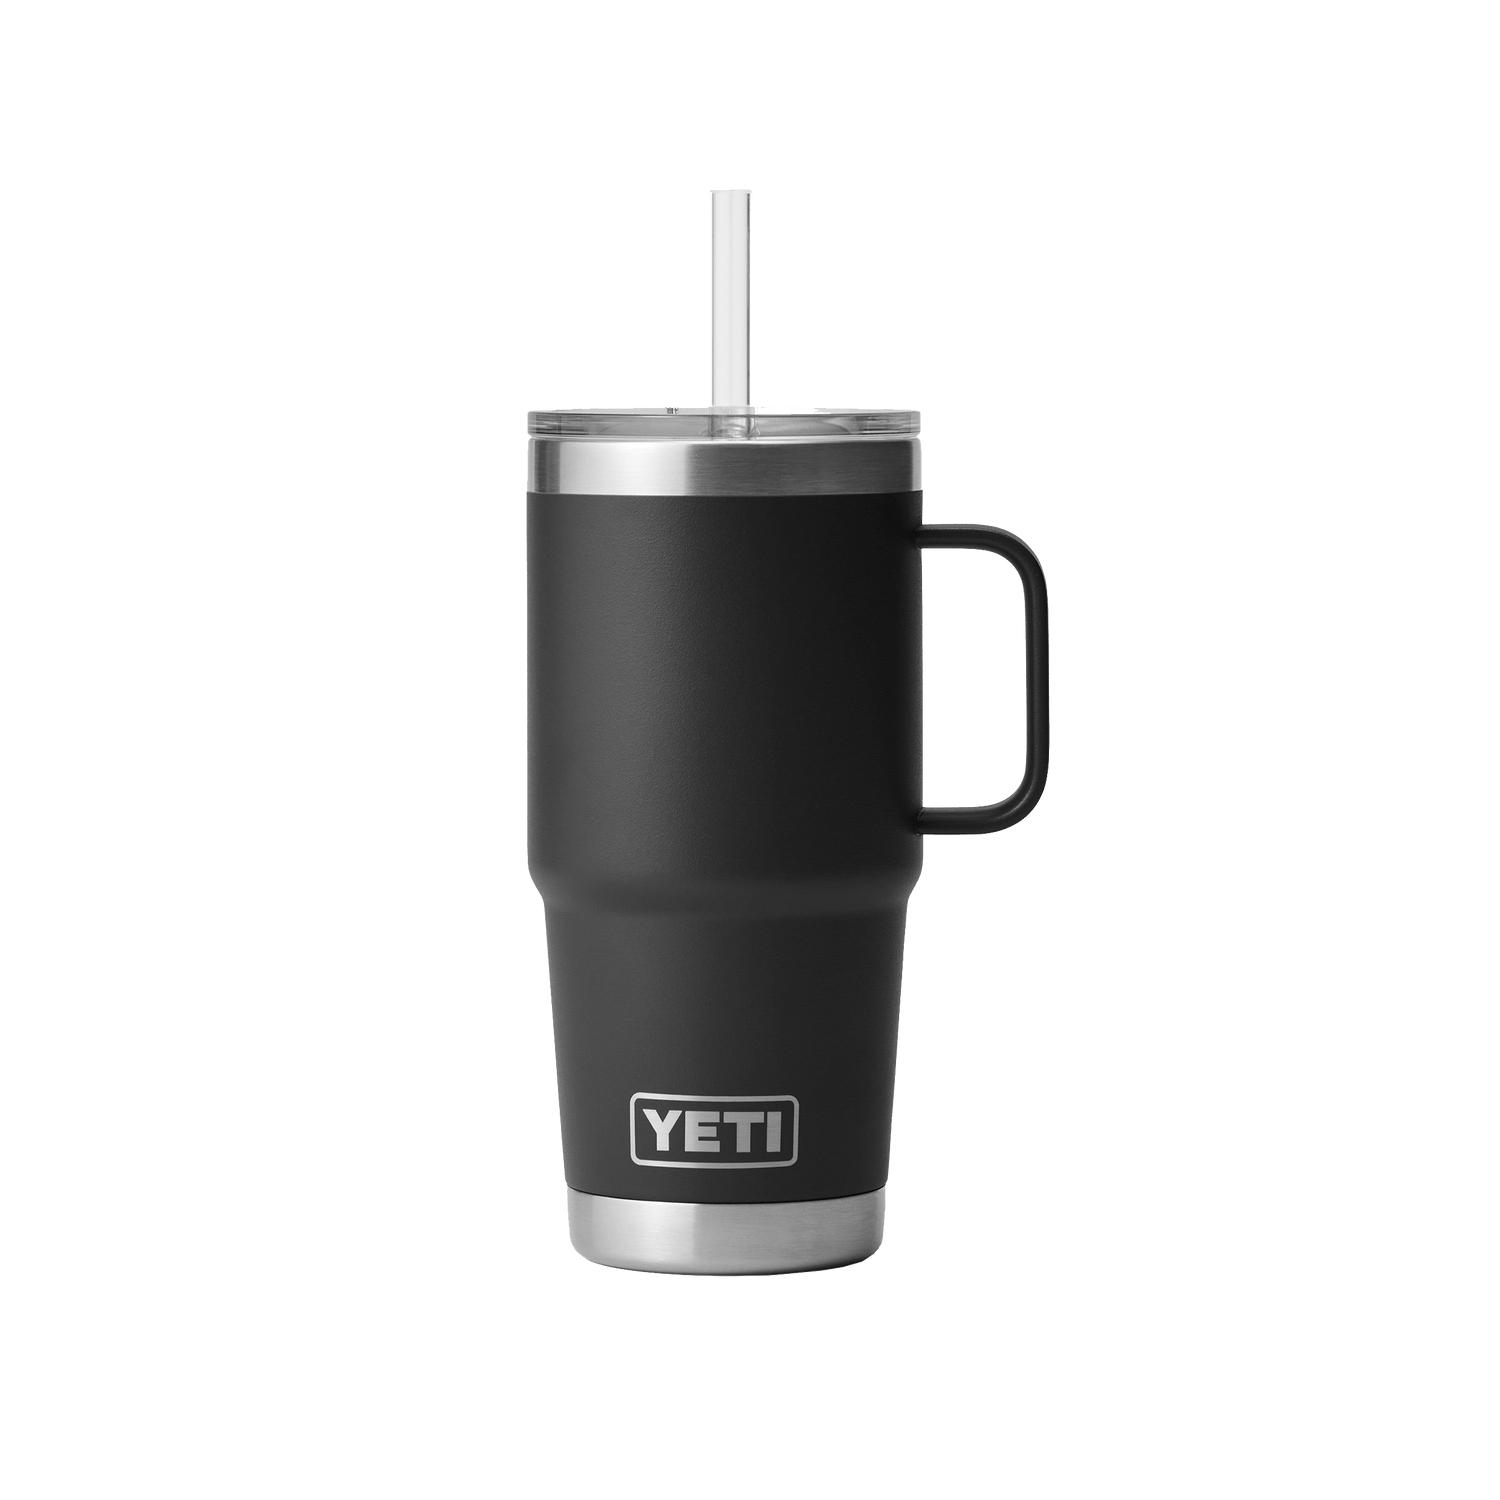 Yeti Cooler Cup Holder (Personal Use)